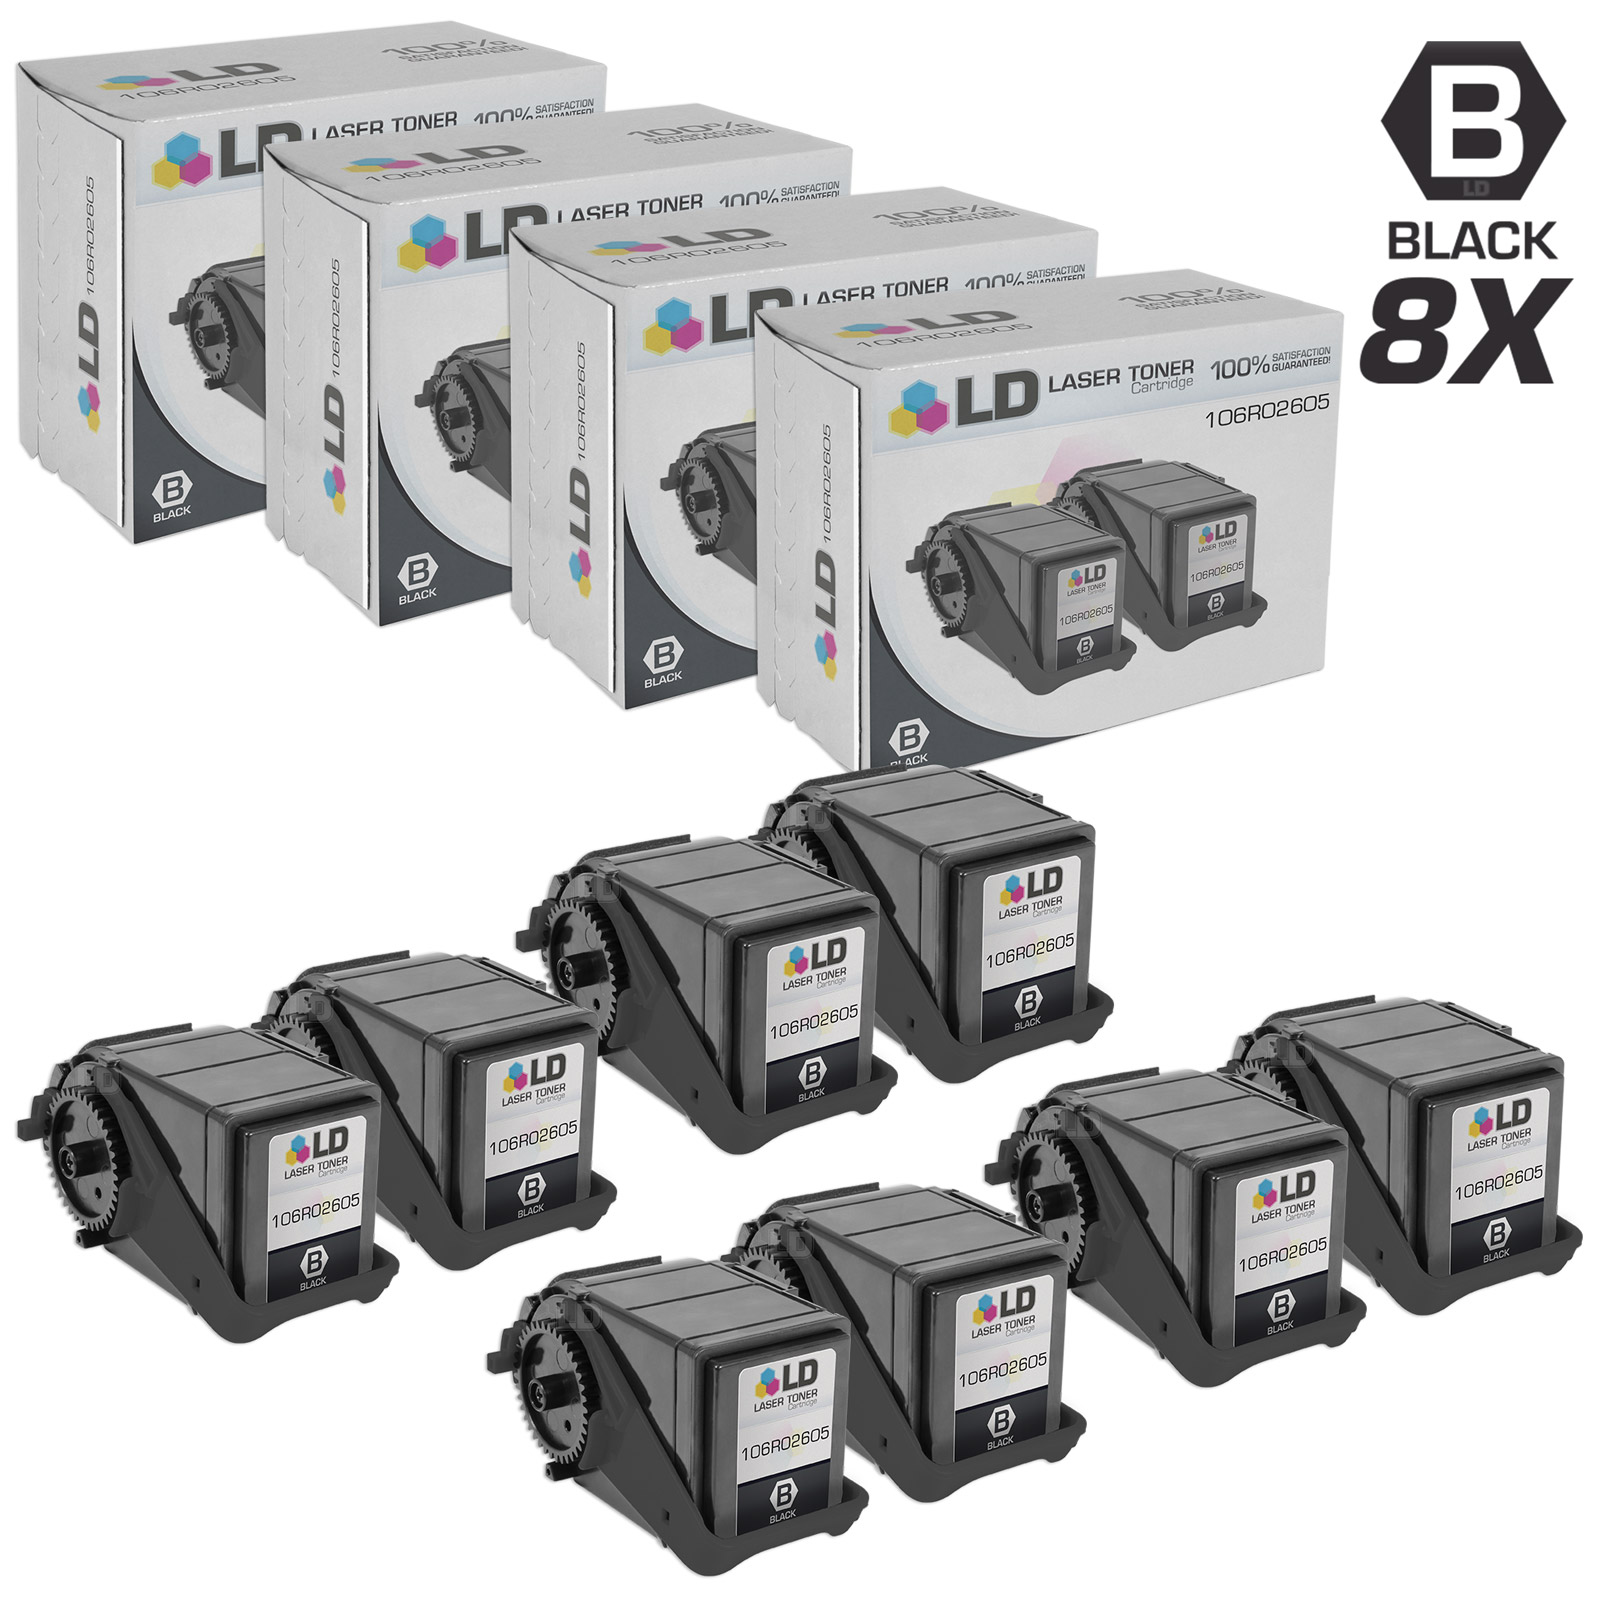 Compatible Replacement for Xerox 106R02605 Set of 8 Black Laser Toner Cartridges for use in Xerox Phaser 7100 - image 1 of 1